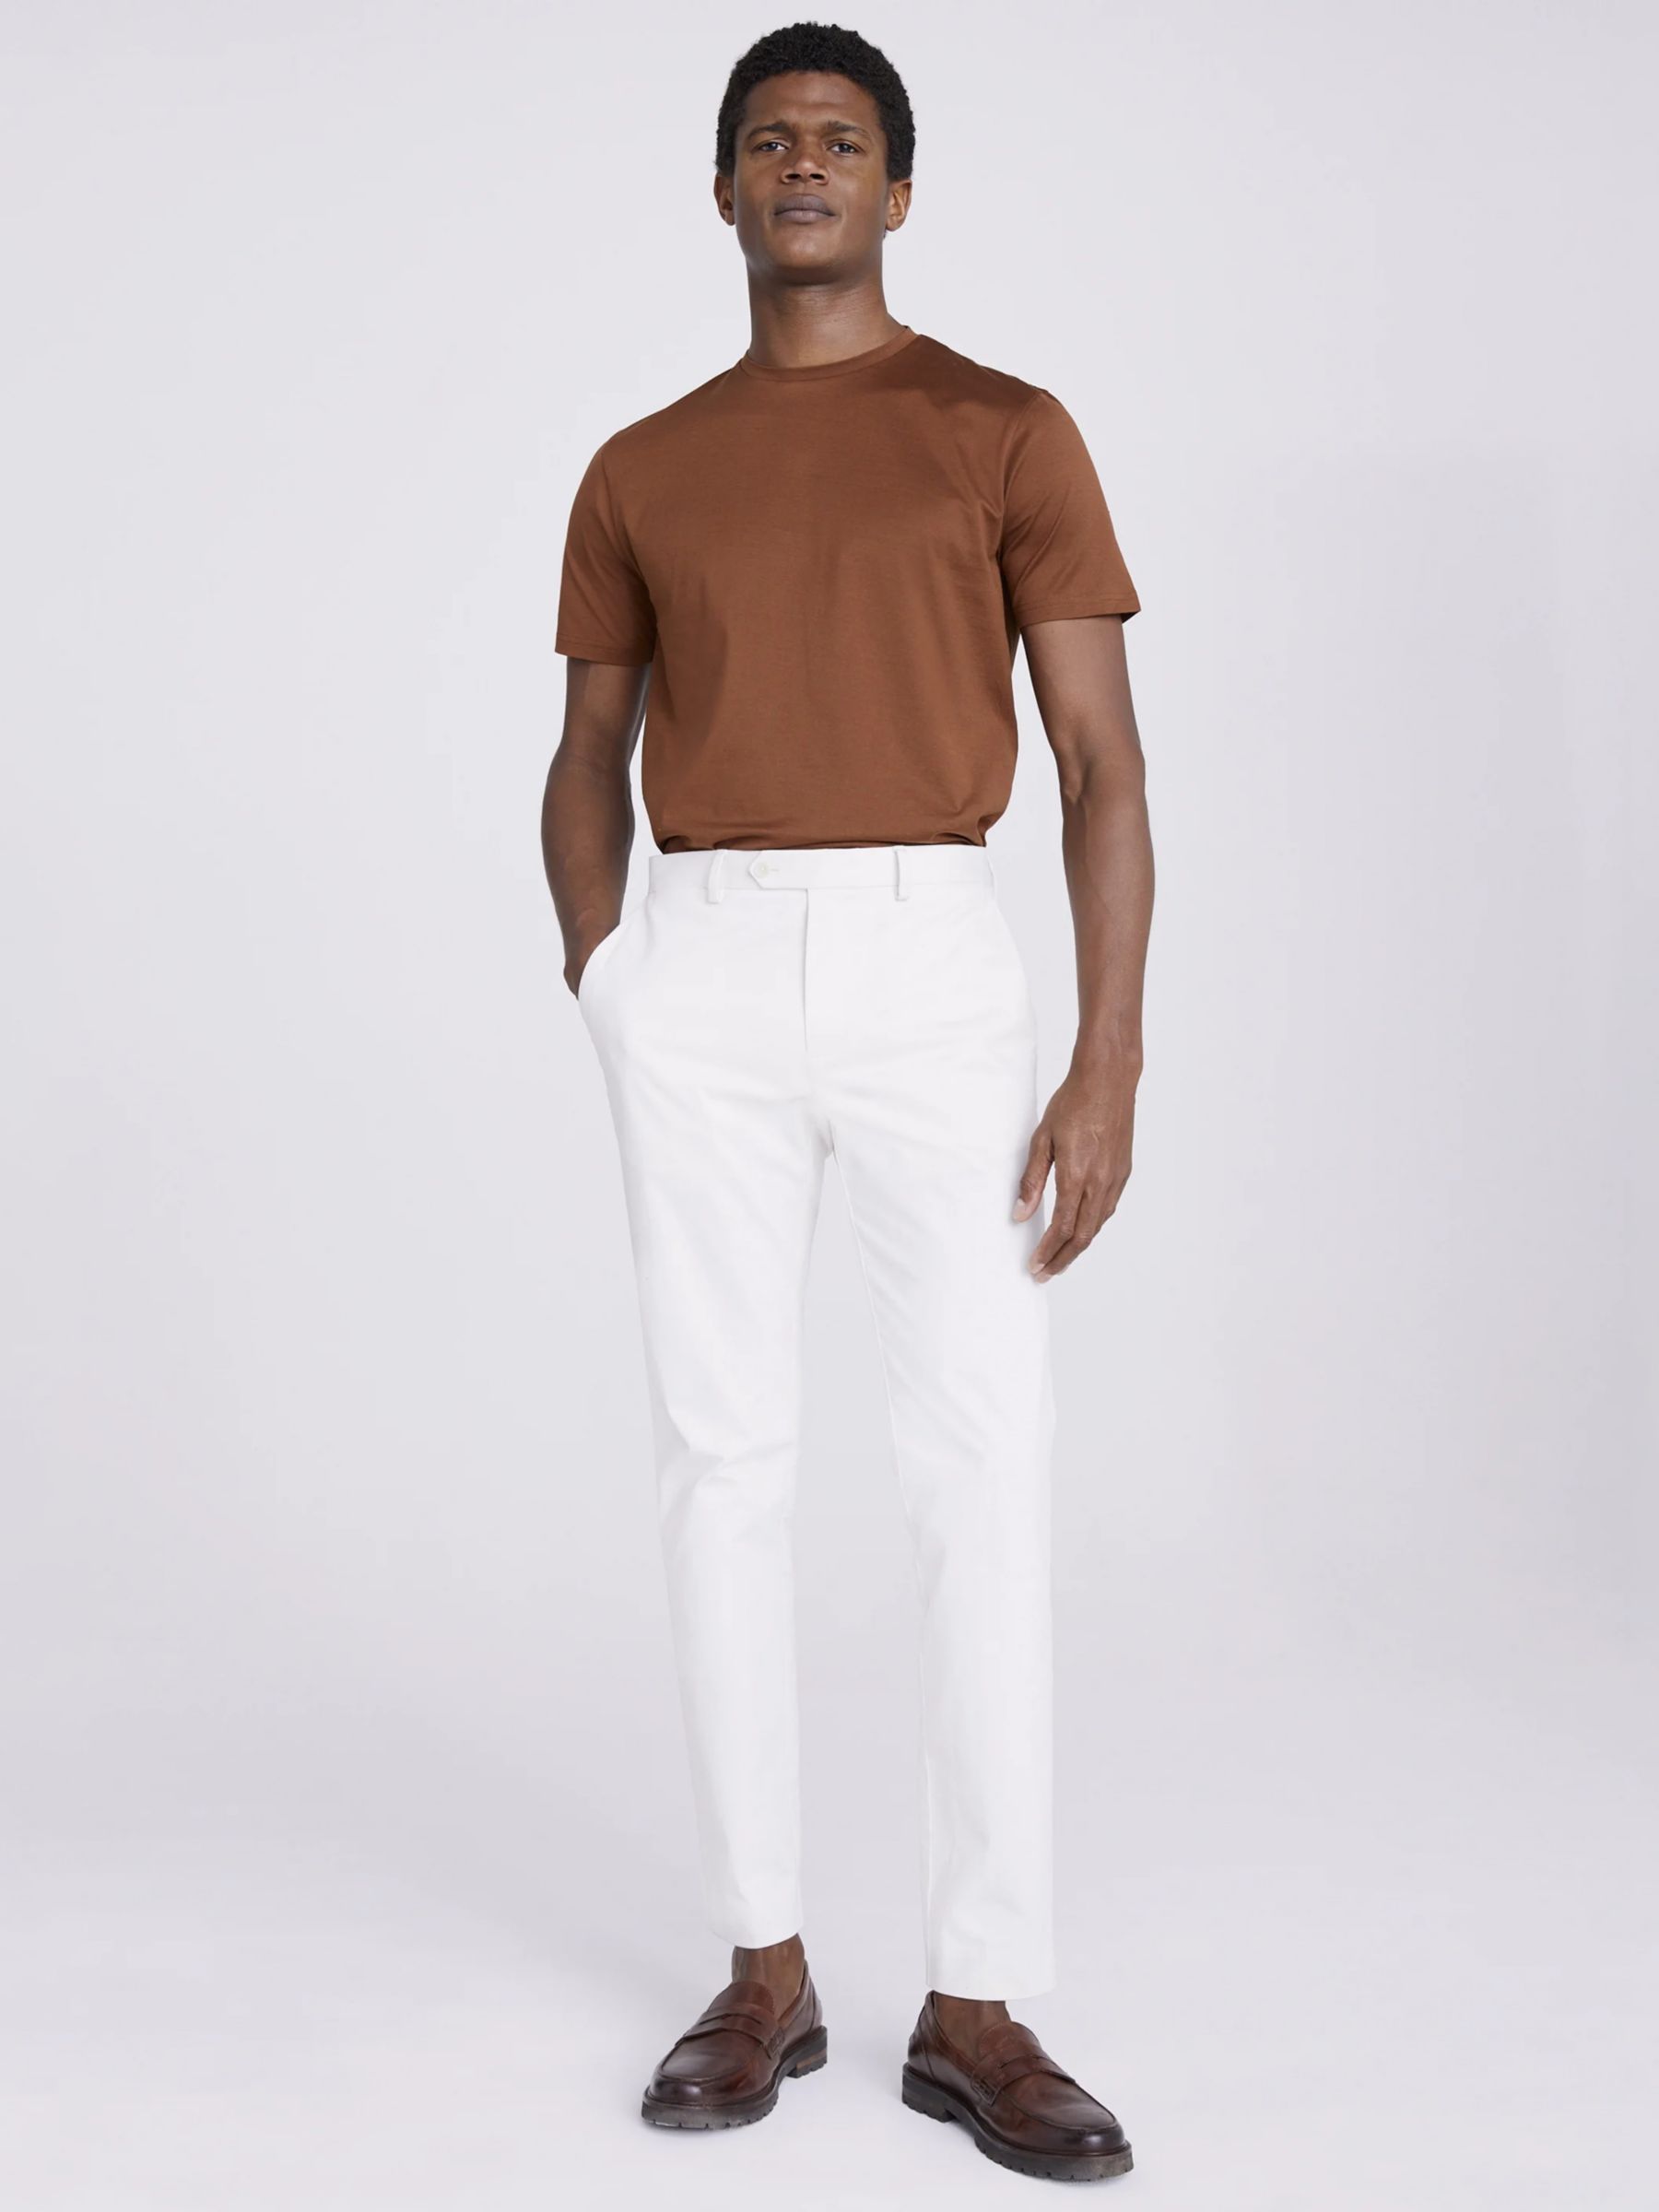 Buy Moss Slim Fit Organic Cotton Stretch Chinos Online at johnlewis.com